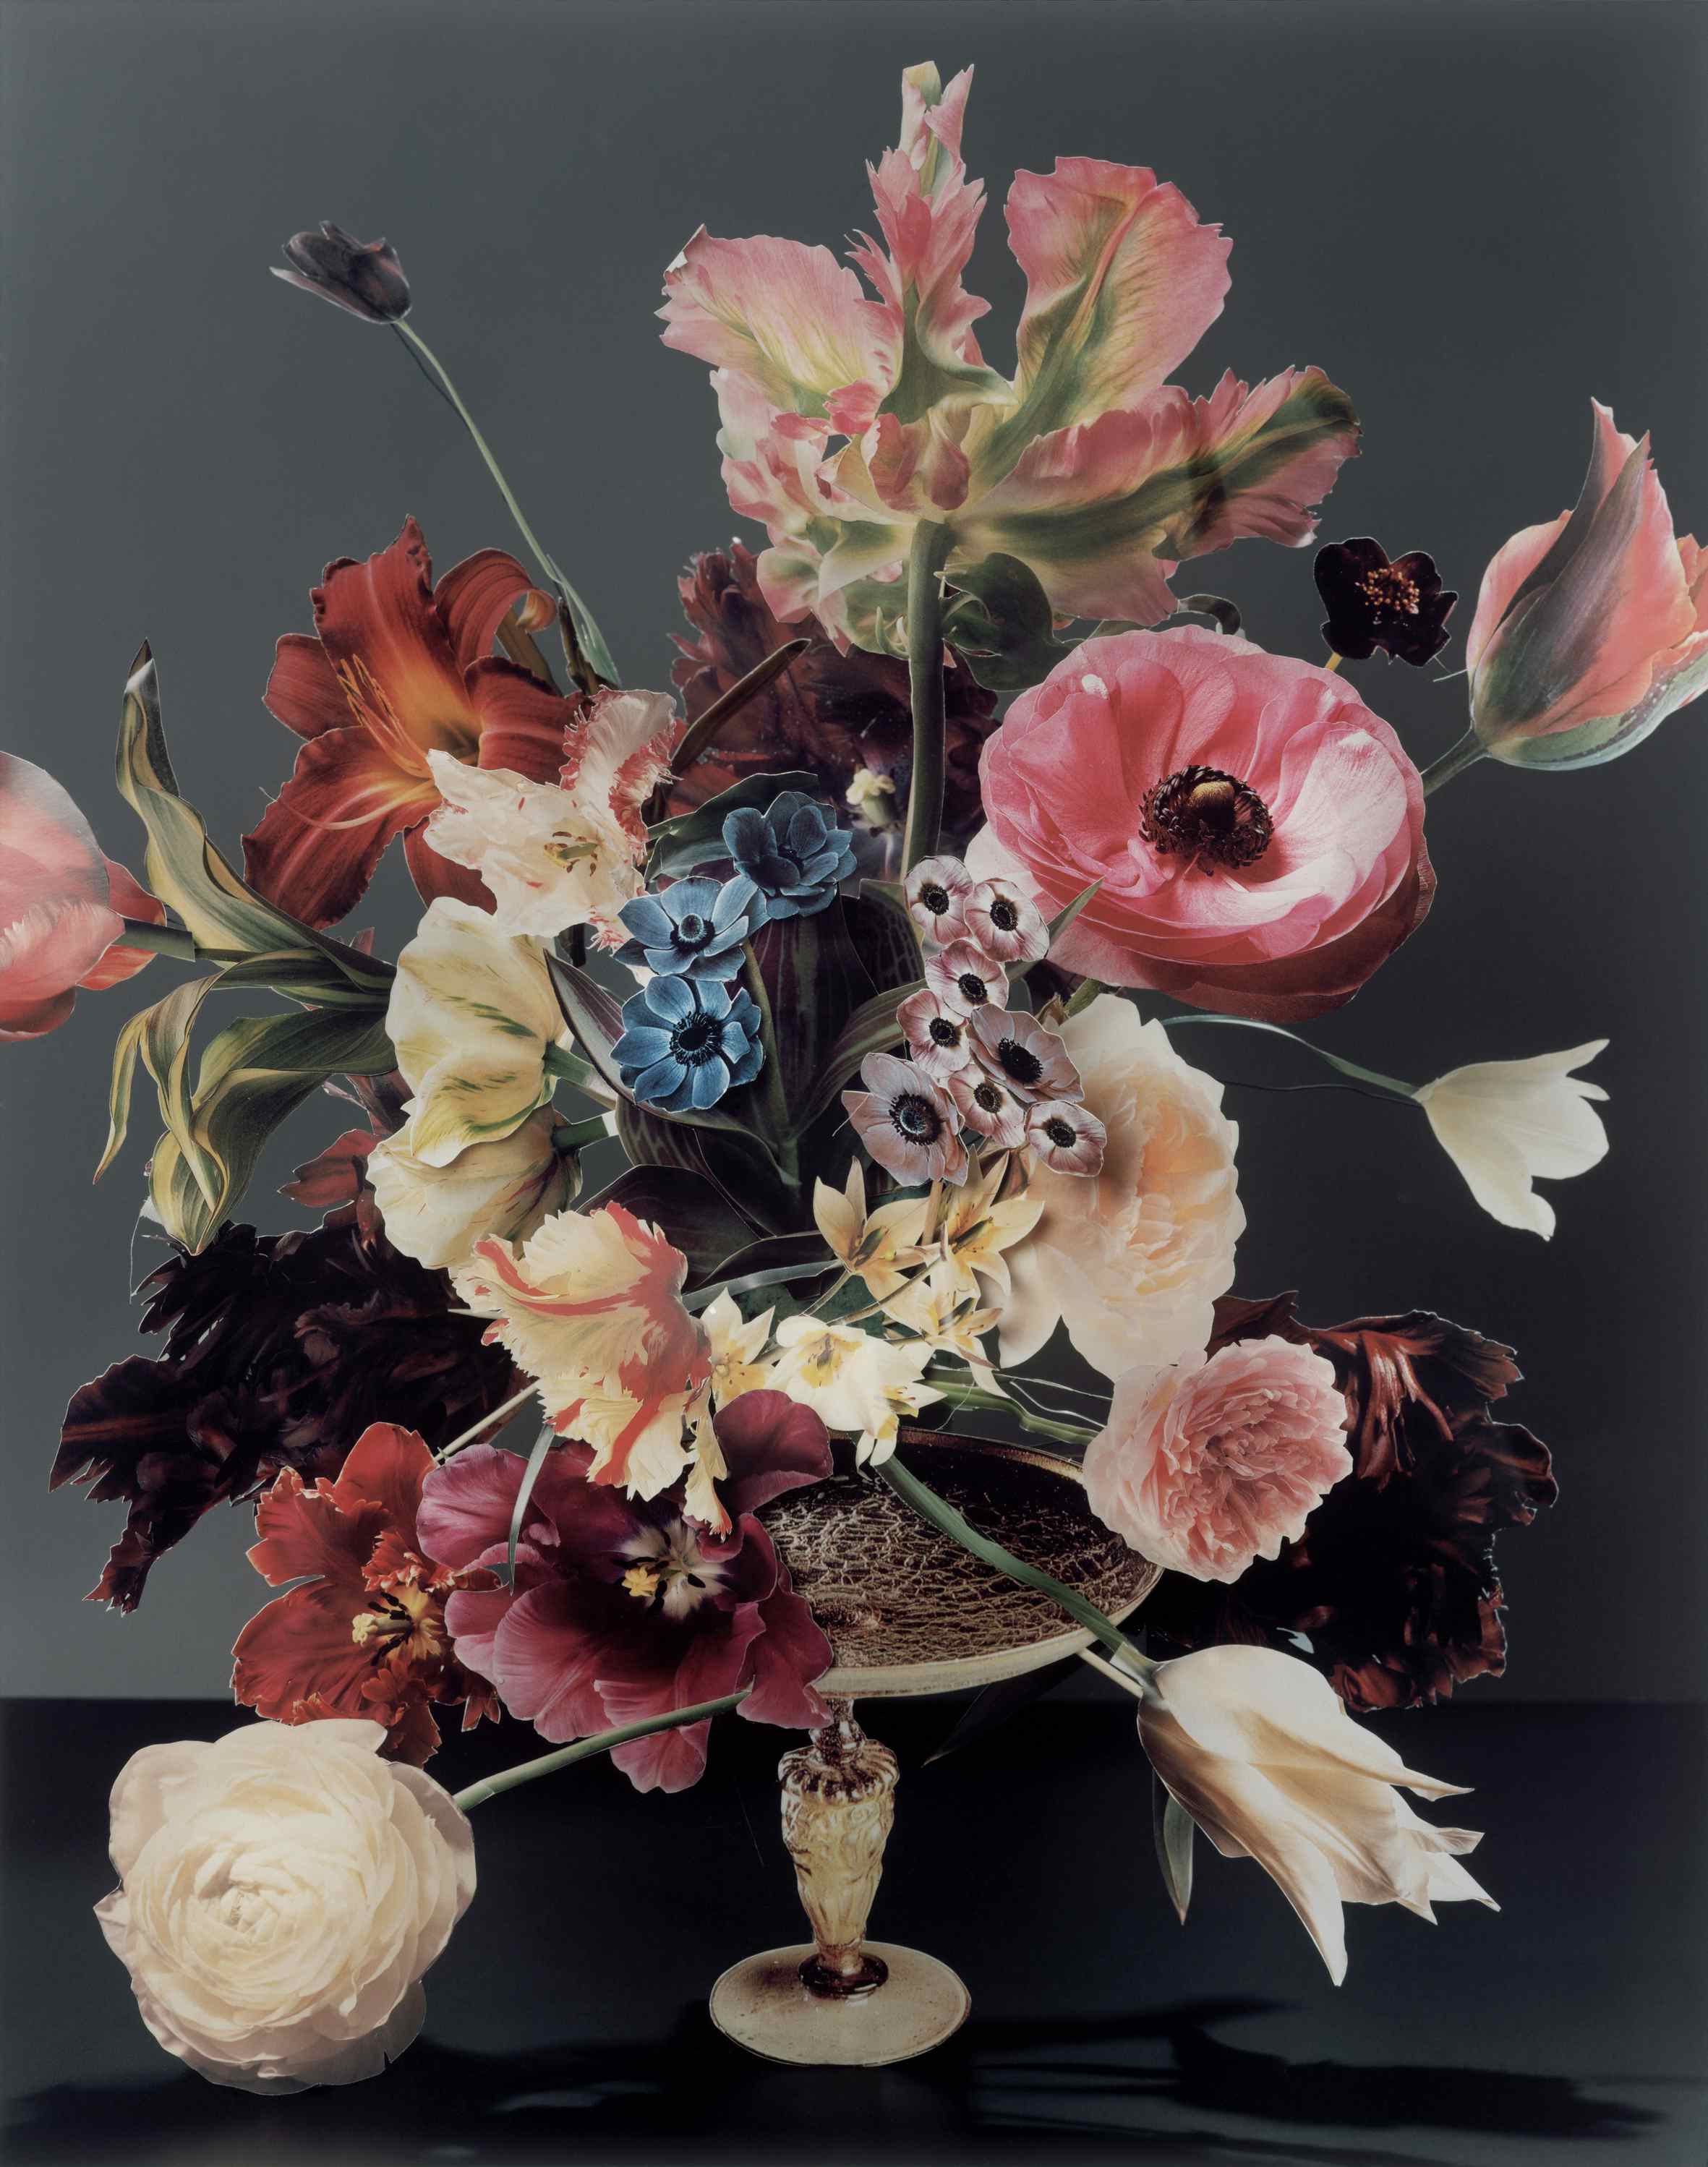 Bouquet V, 2008 © Scheltens & Abbenes, courtesy of the Foam Collection